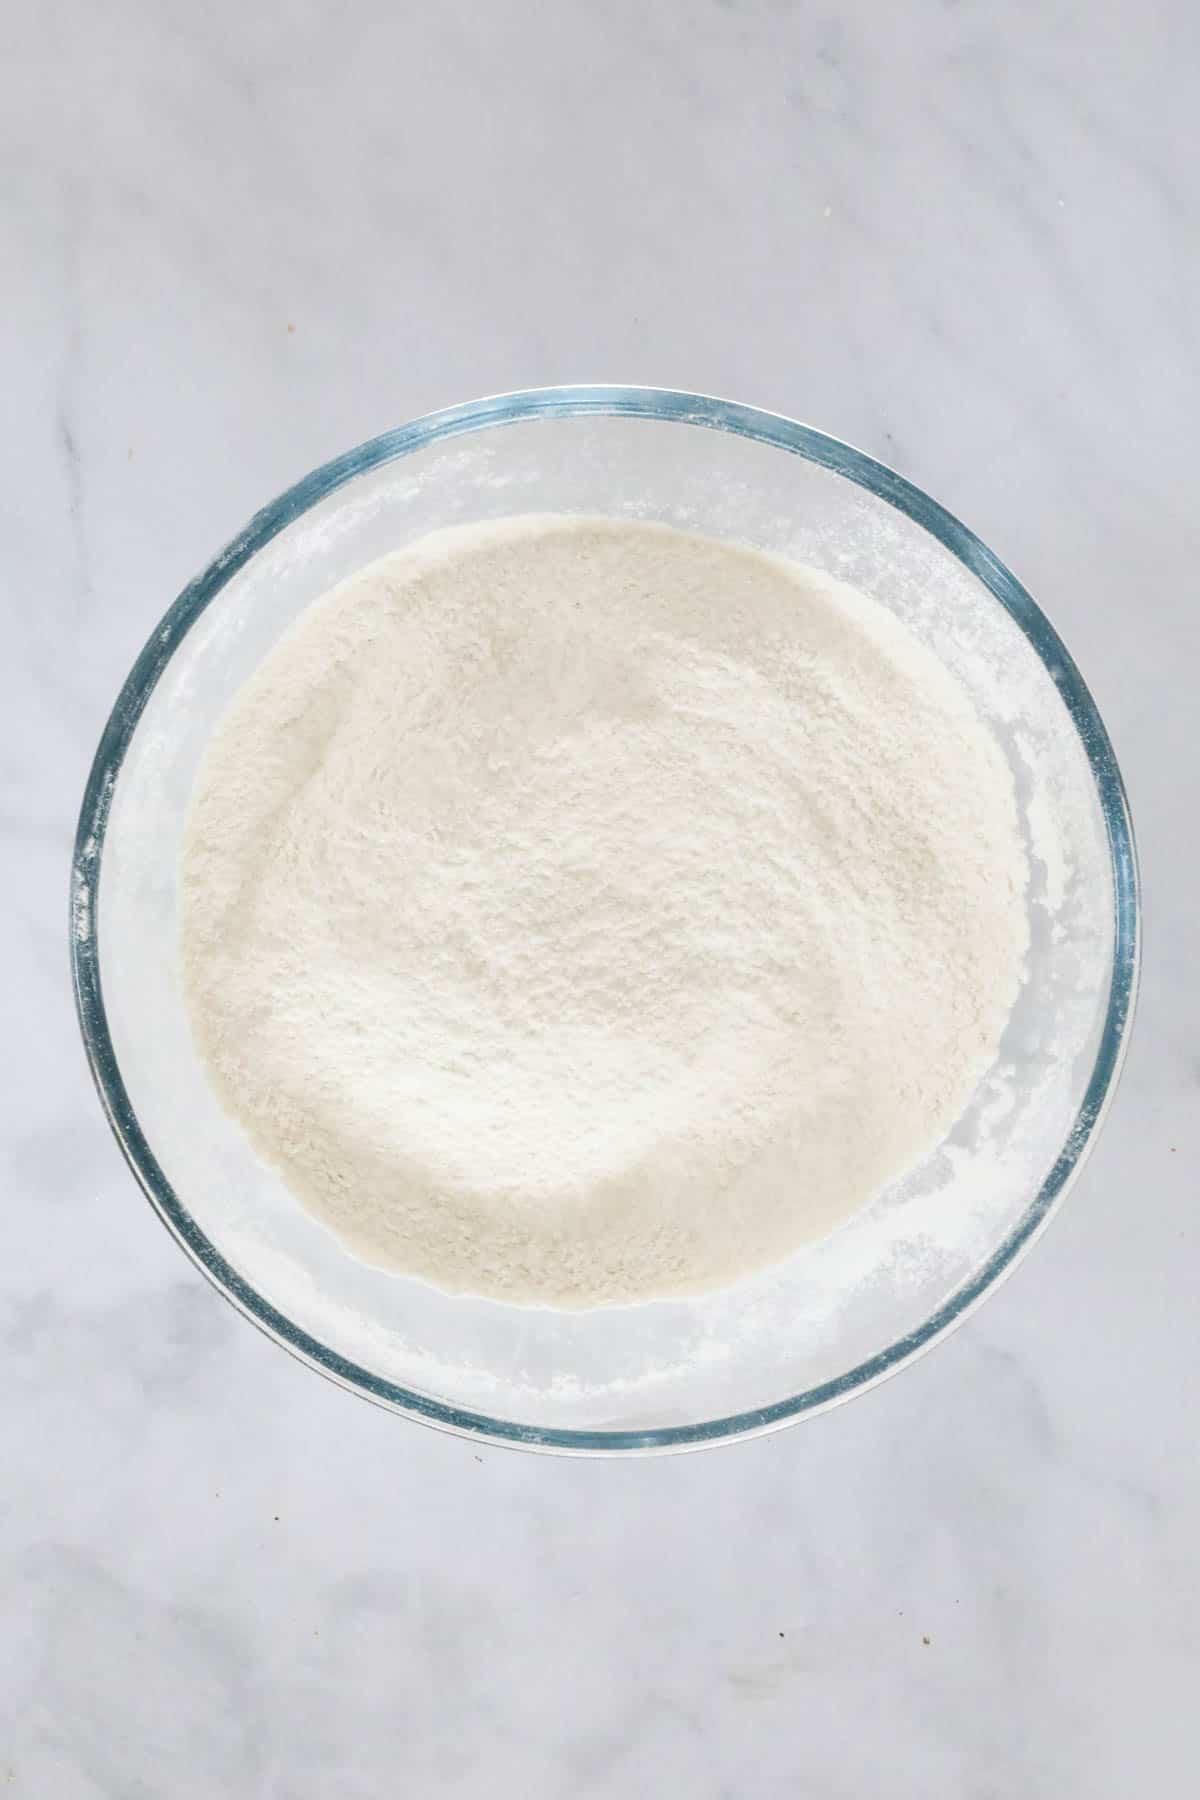 Sifted flour in a large mixing bowl.